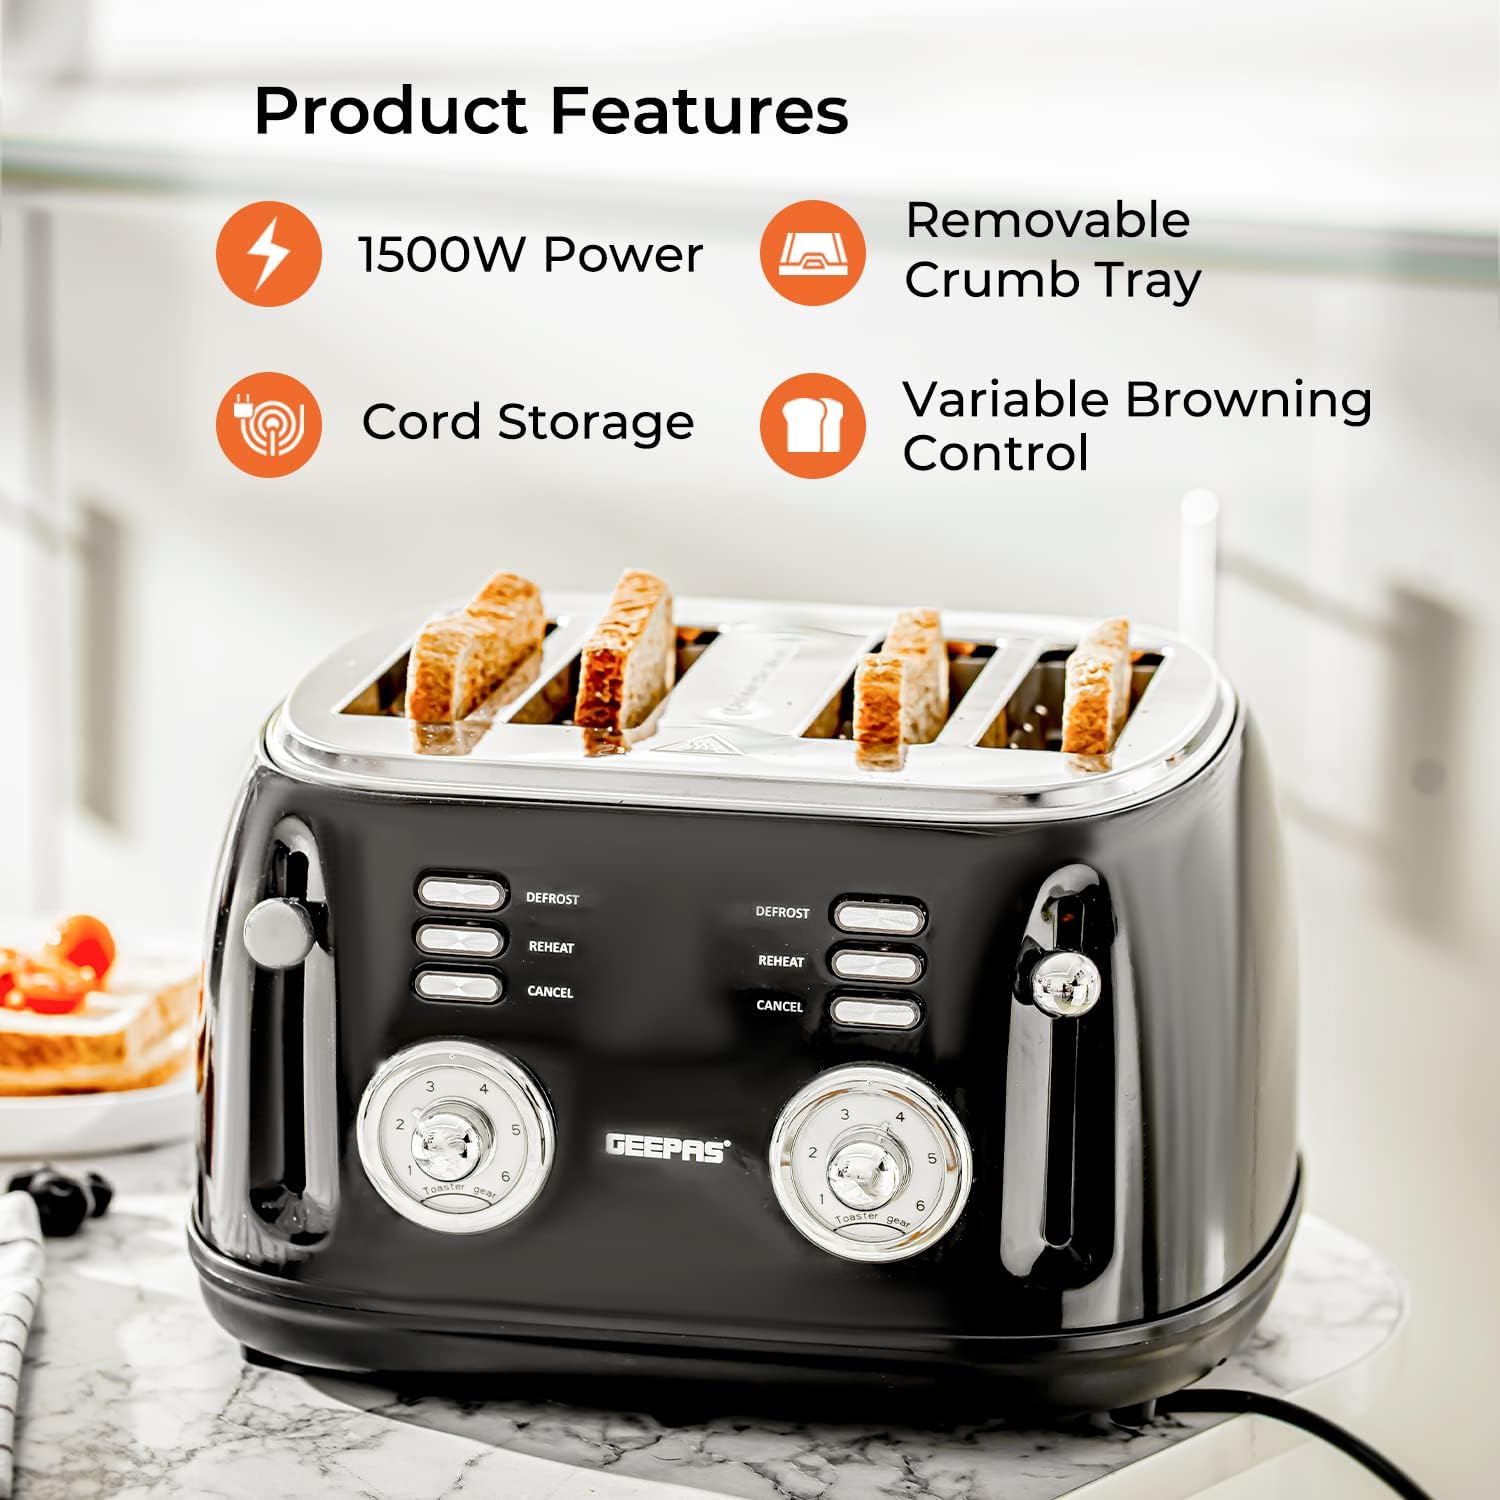 Premium Four-Slice Vintage Toaster and 1.8L Glass LED Kettle